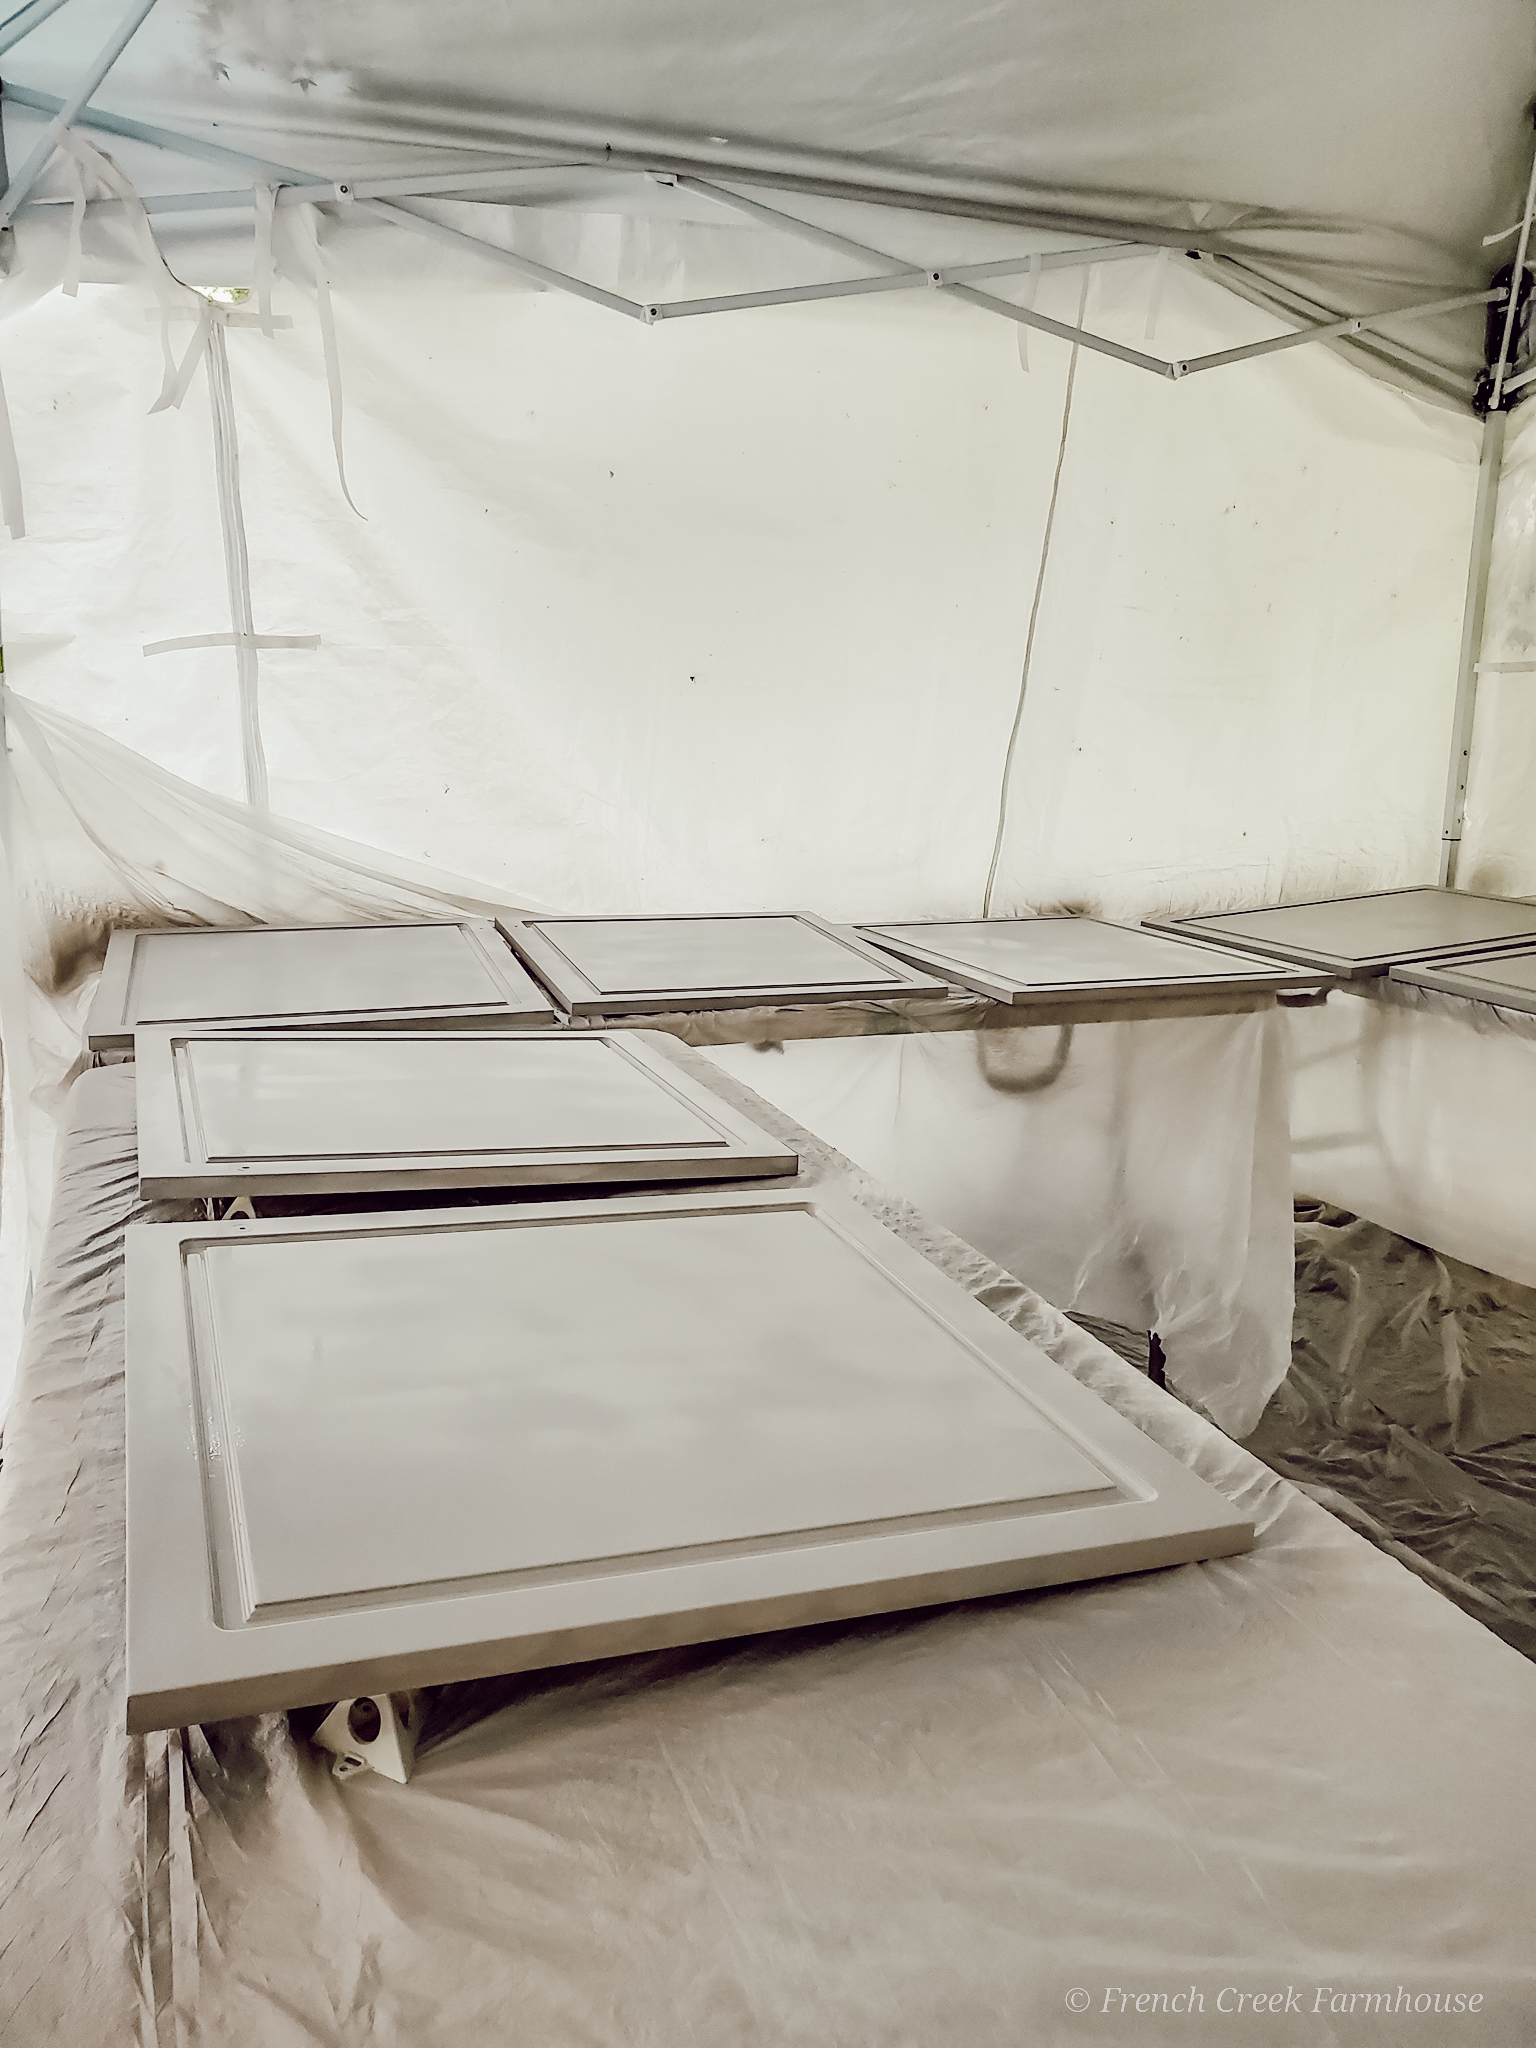 A pop-up canopy tent makes for an easy paint booth